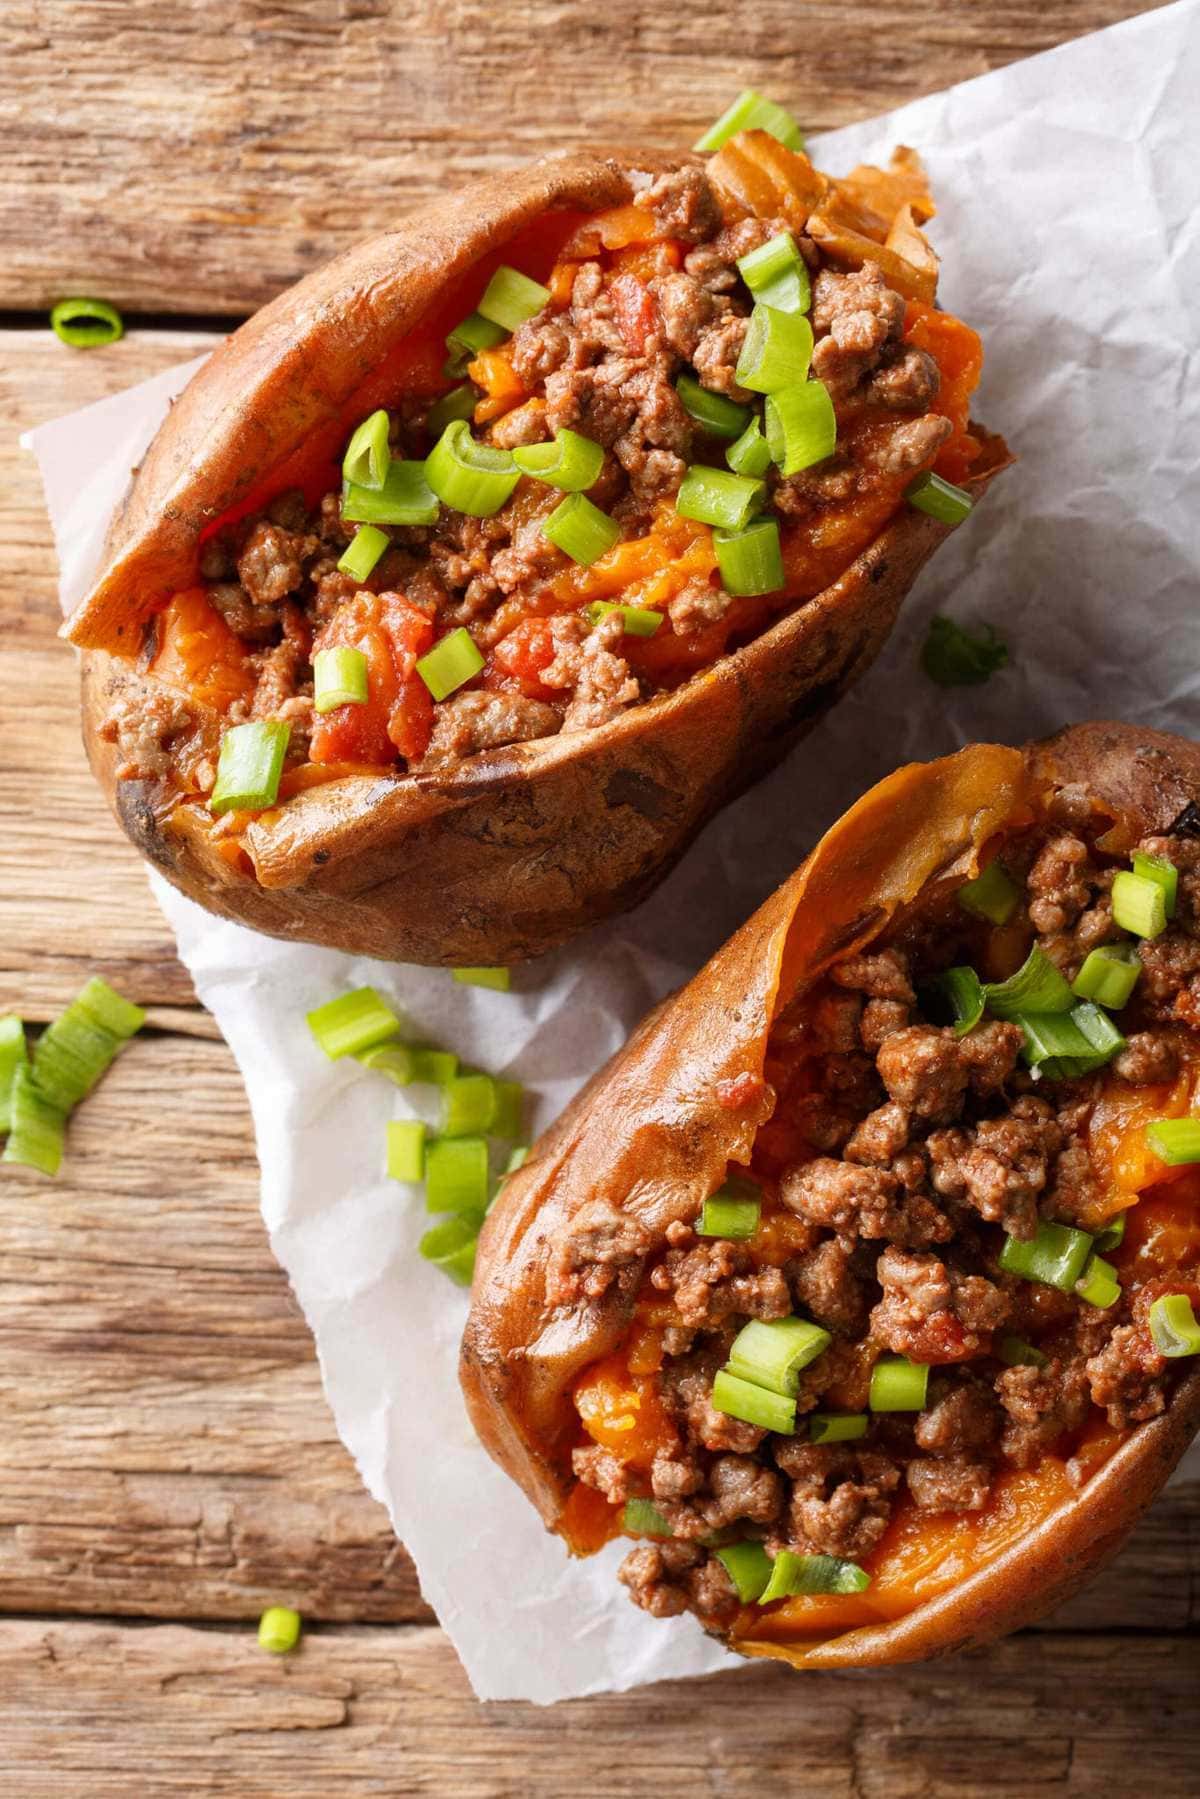 A cooked sweet potato, split open and stuffed with Sloppy Joe filling and topped with green onions.